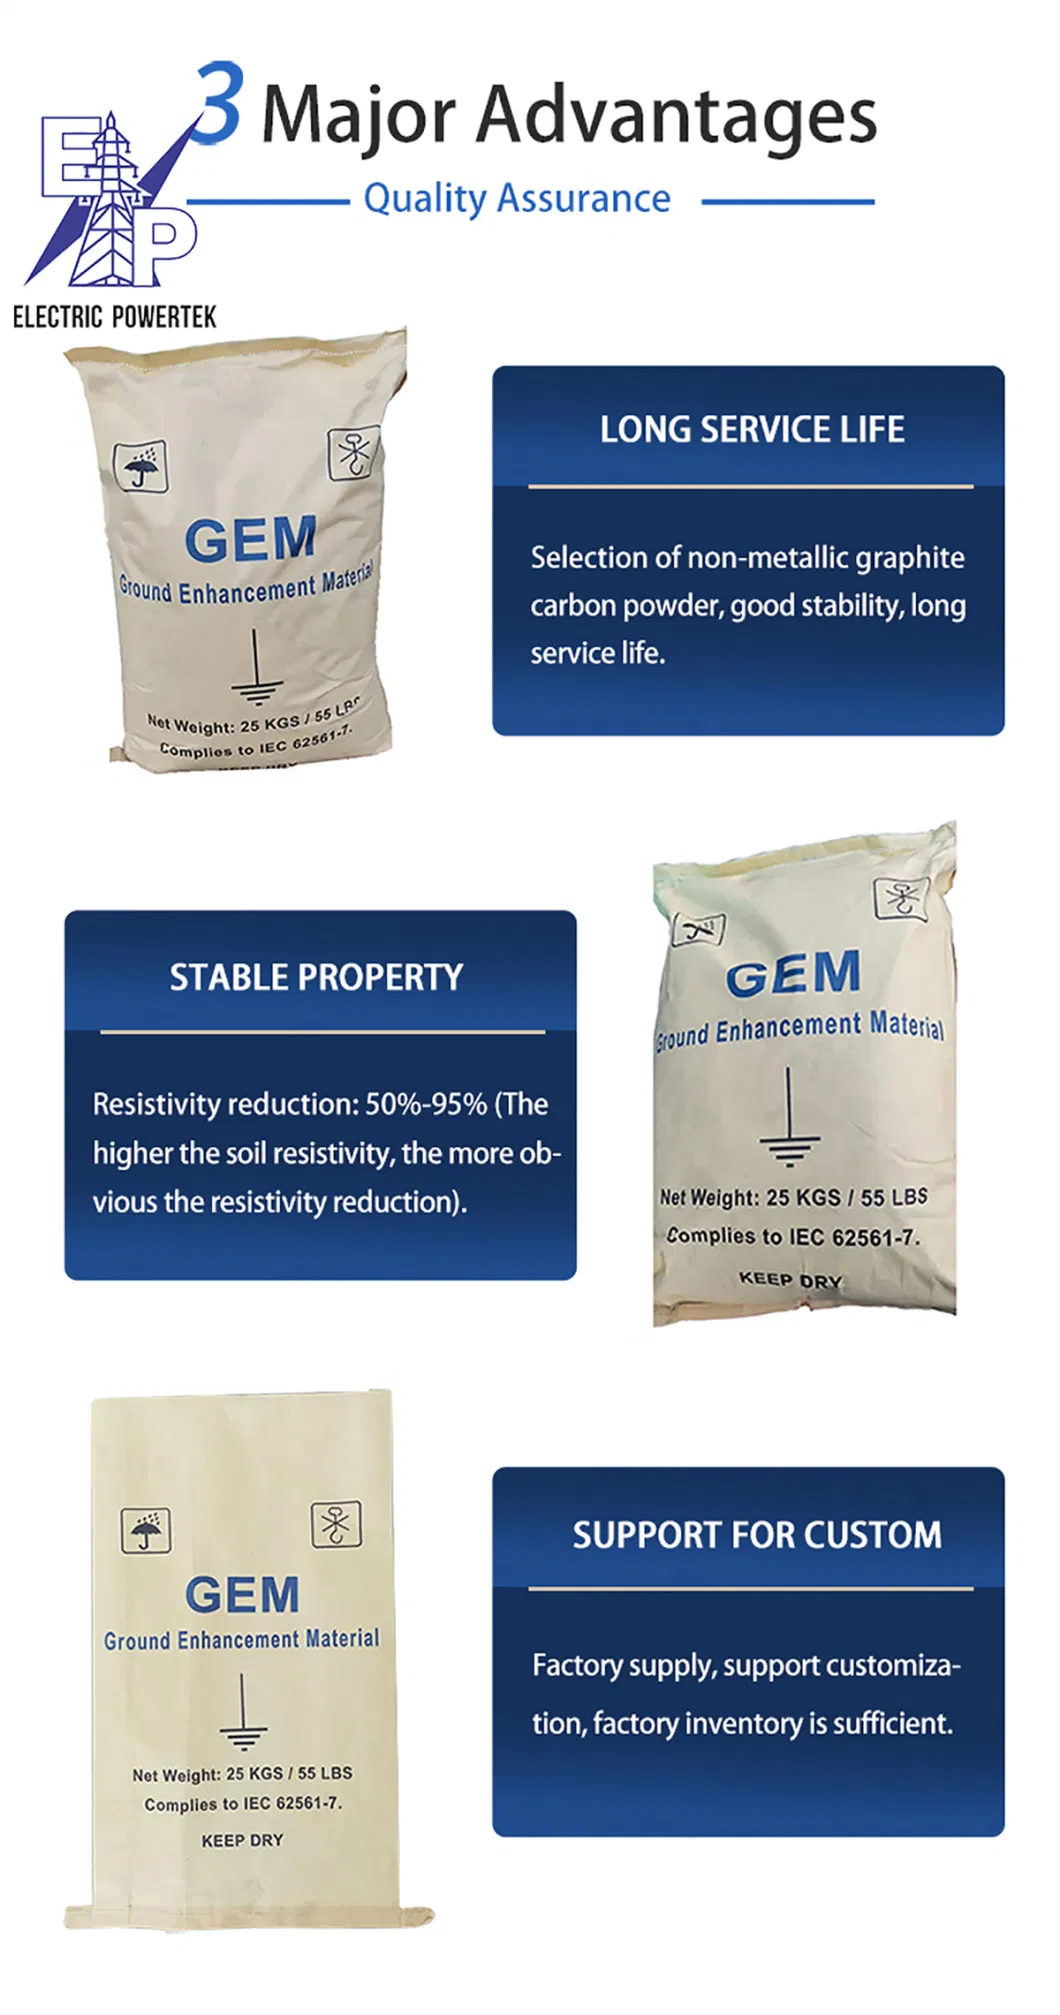 Bentonite Earthing Compound Ground Enhancement Material